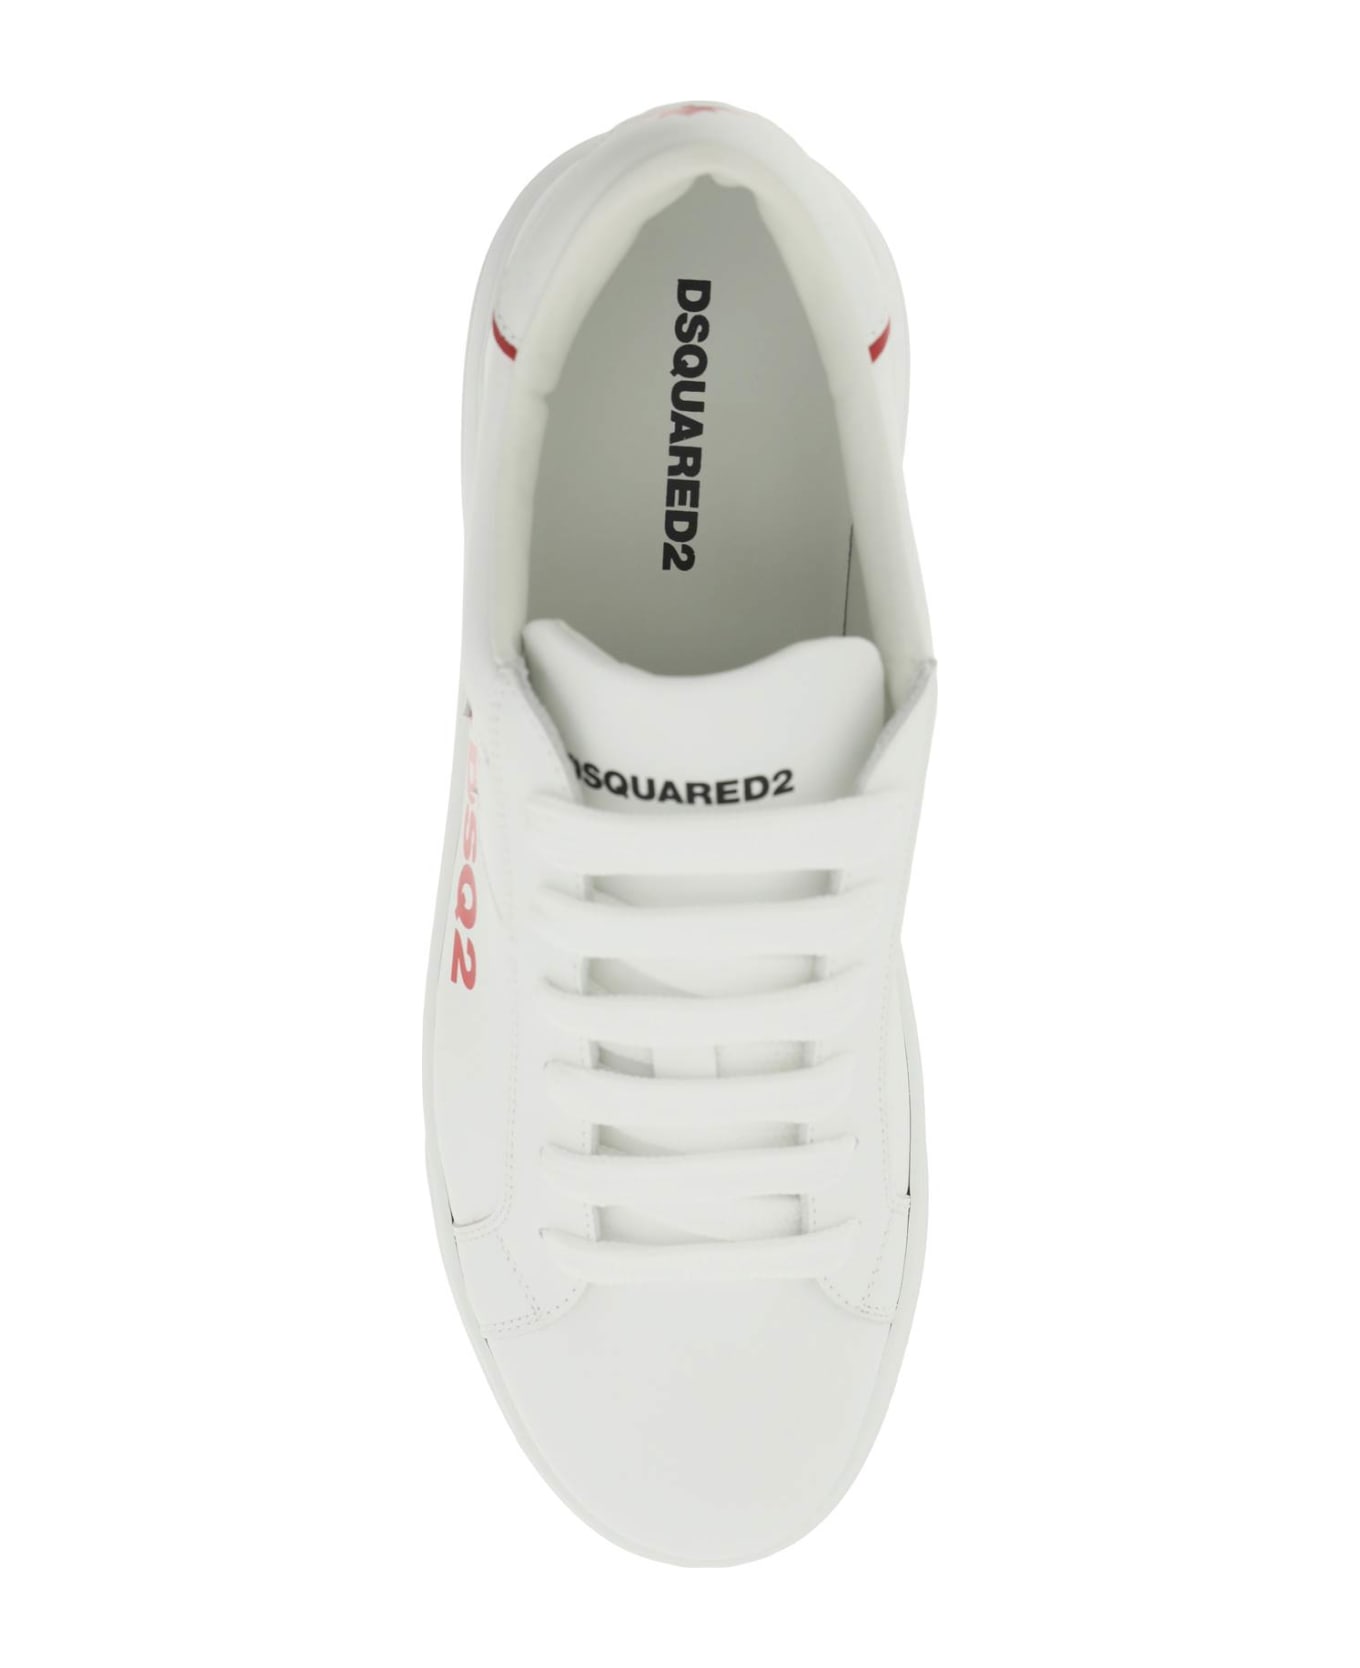 Dsquared2 Bumper Low-top Lace-up Leather Sneakers - BIANCO ROSSO (Black)